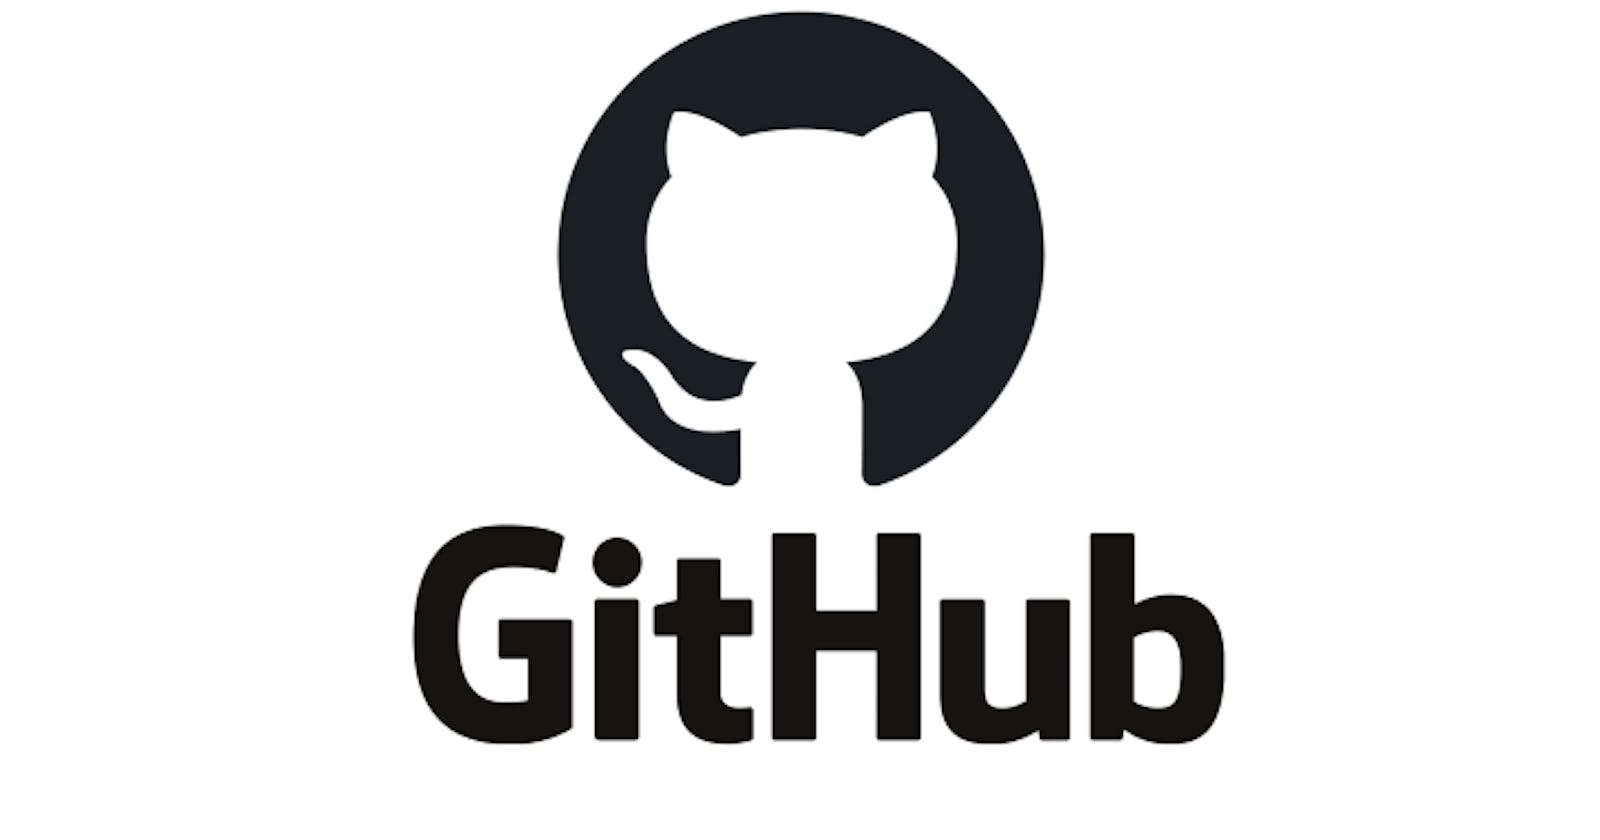 Let’s begin with Git and GitHub